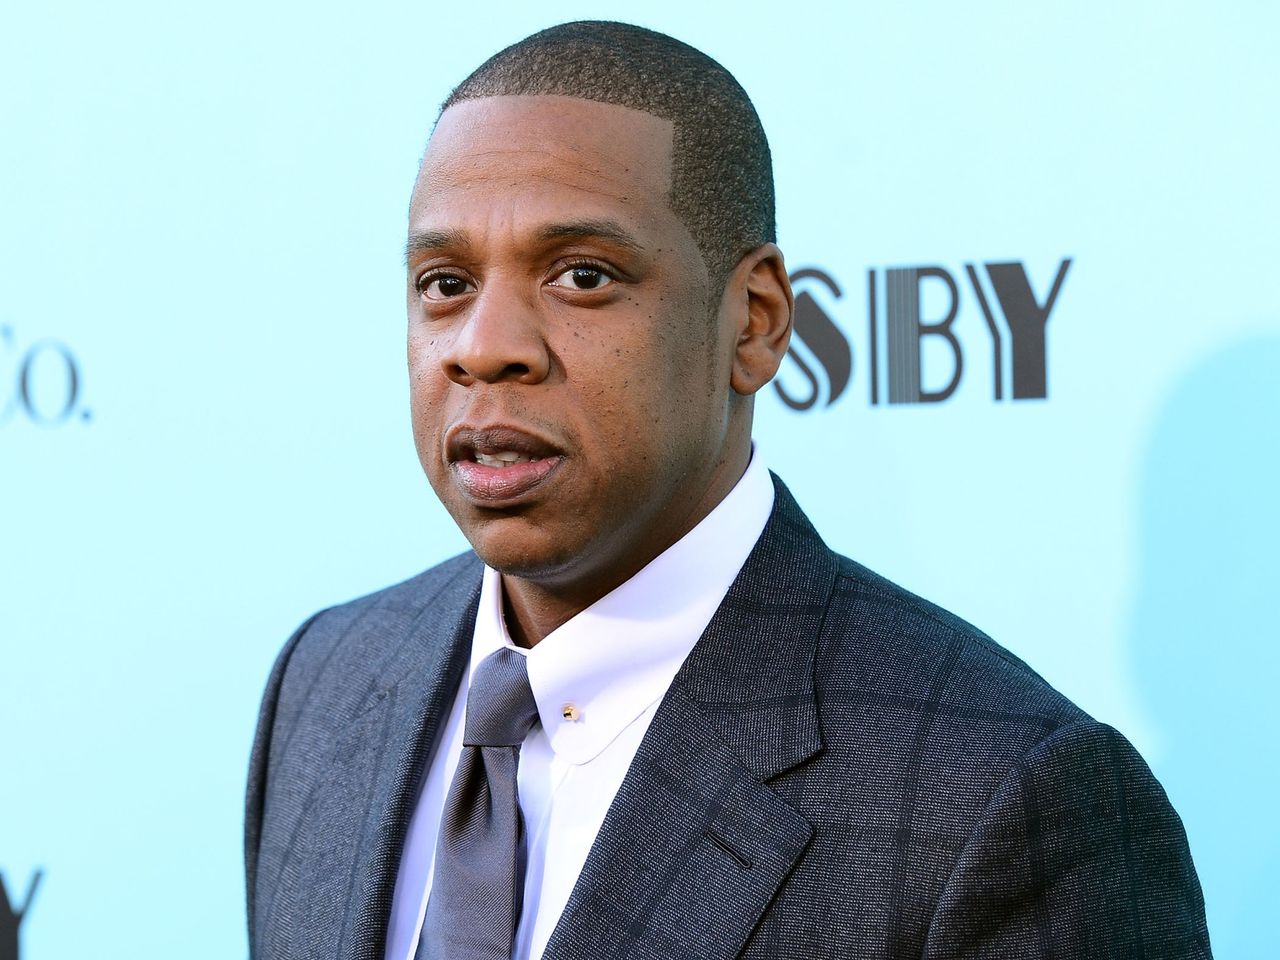 jay-z-is-launching-his-own-venture-capital-firm